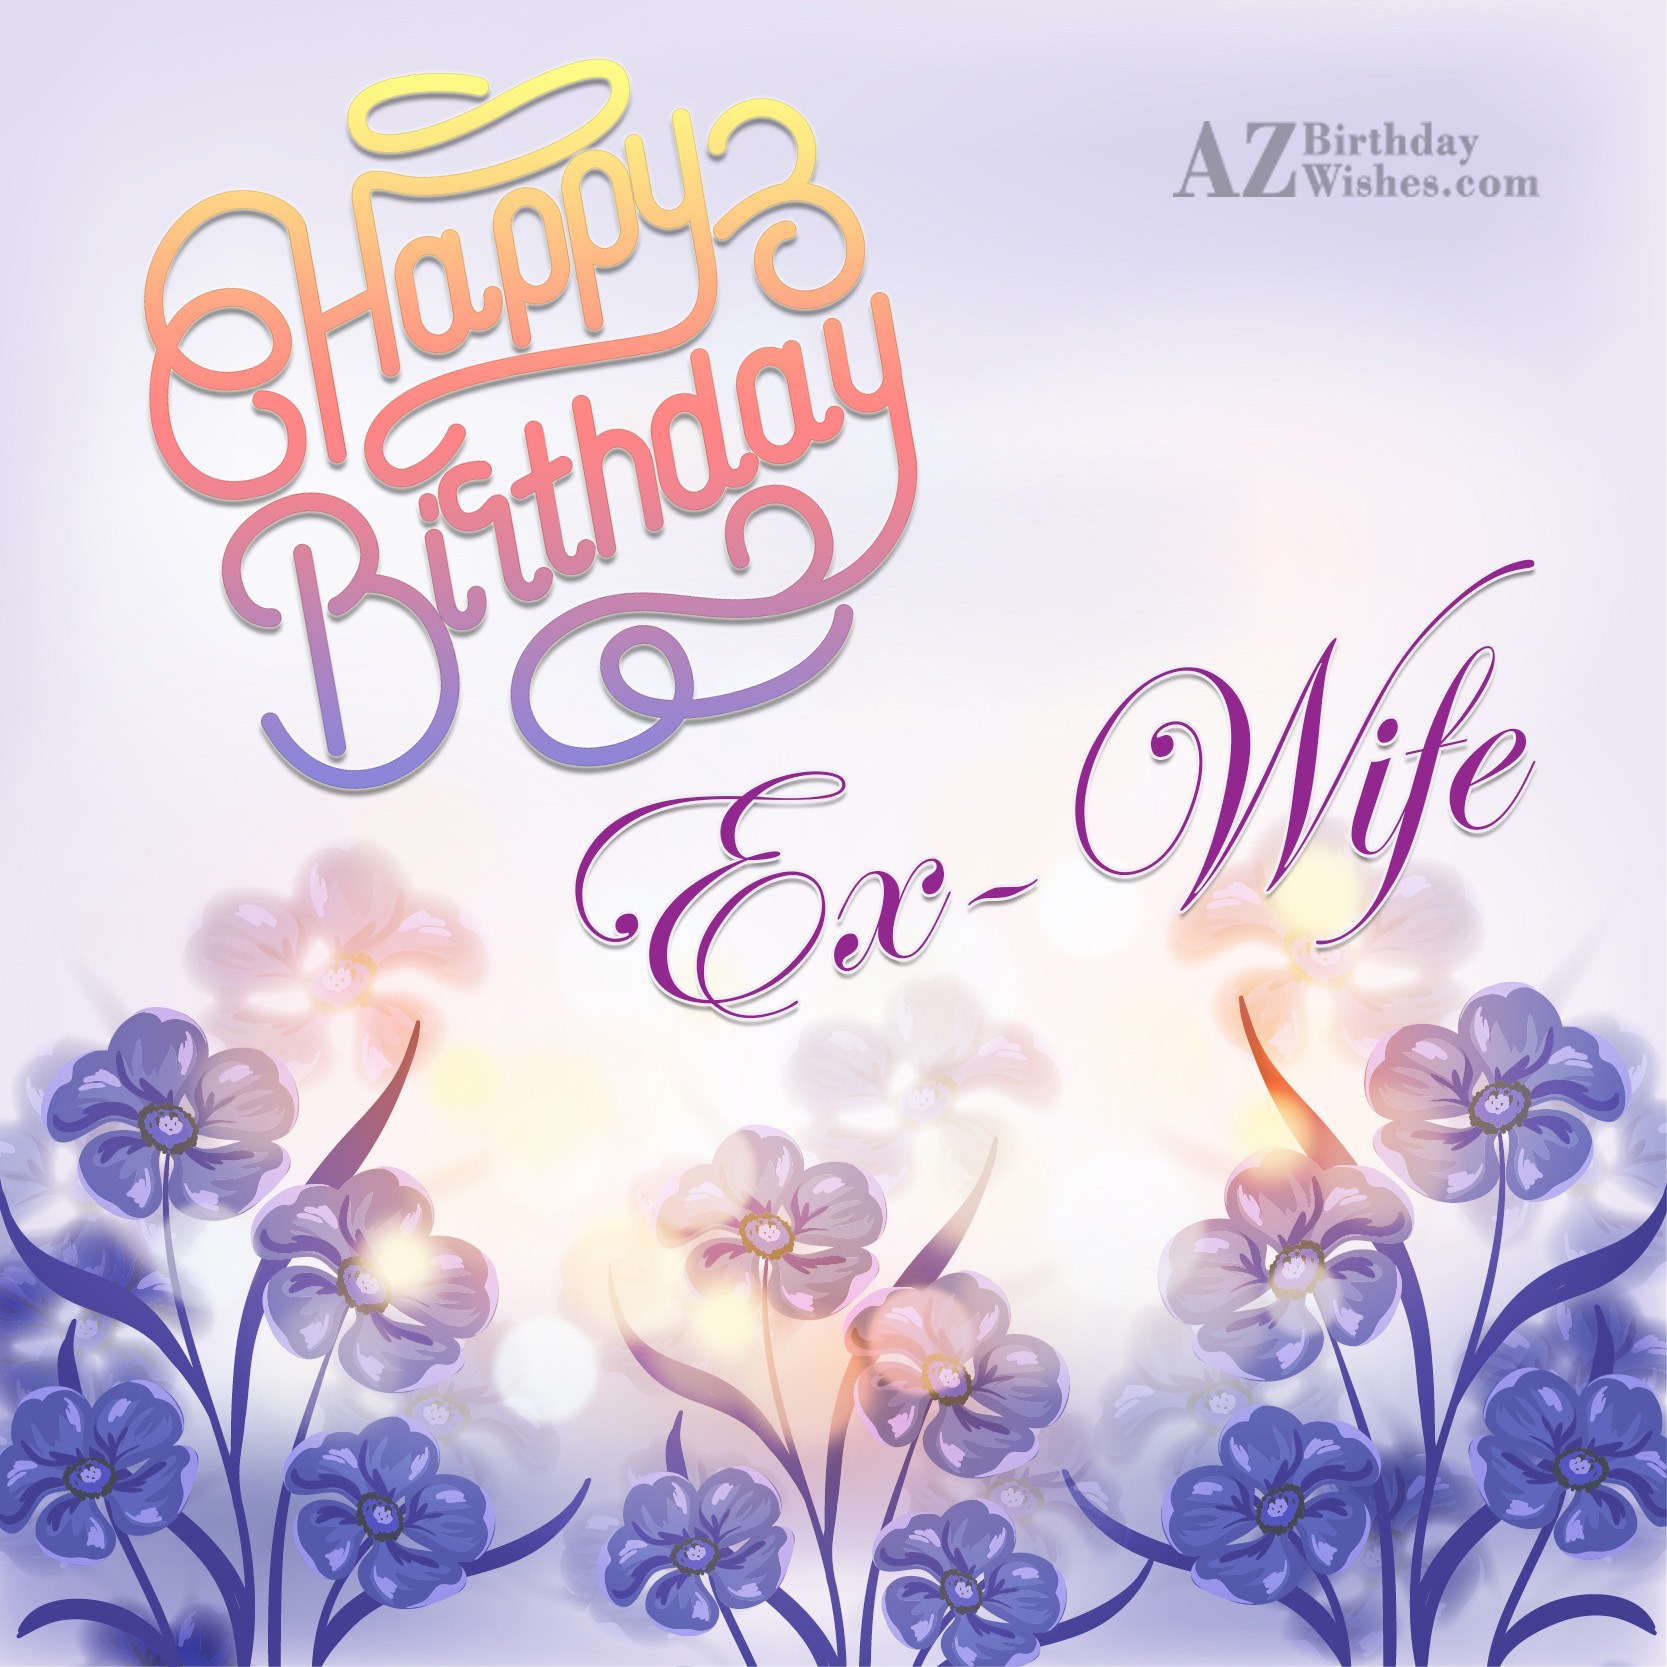 Best Birthday Wishes For Ex Wife4